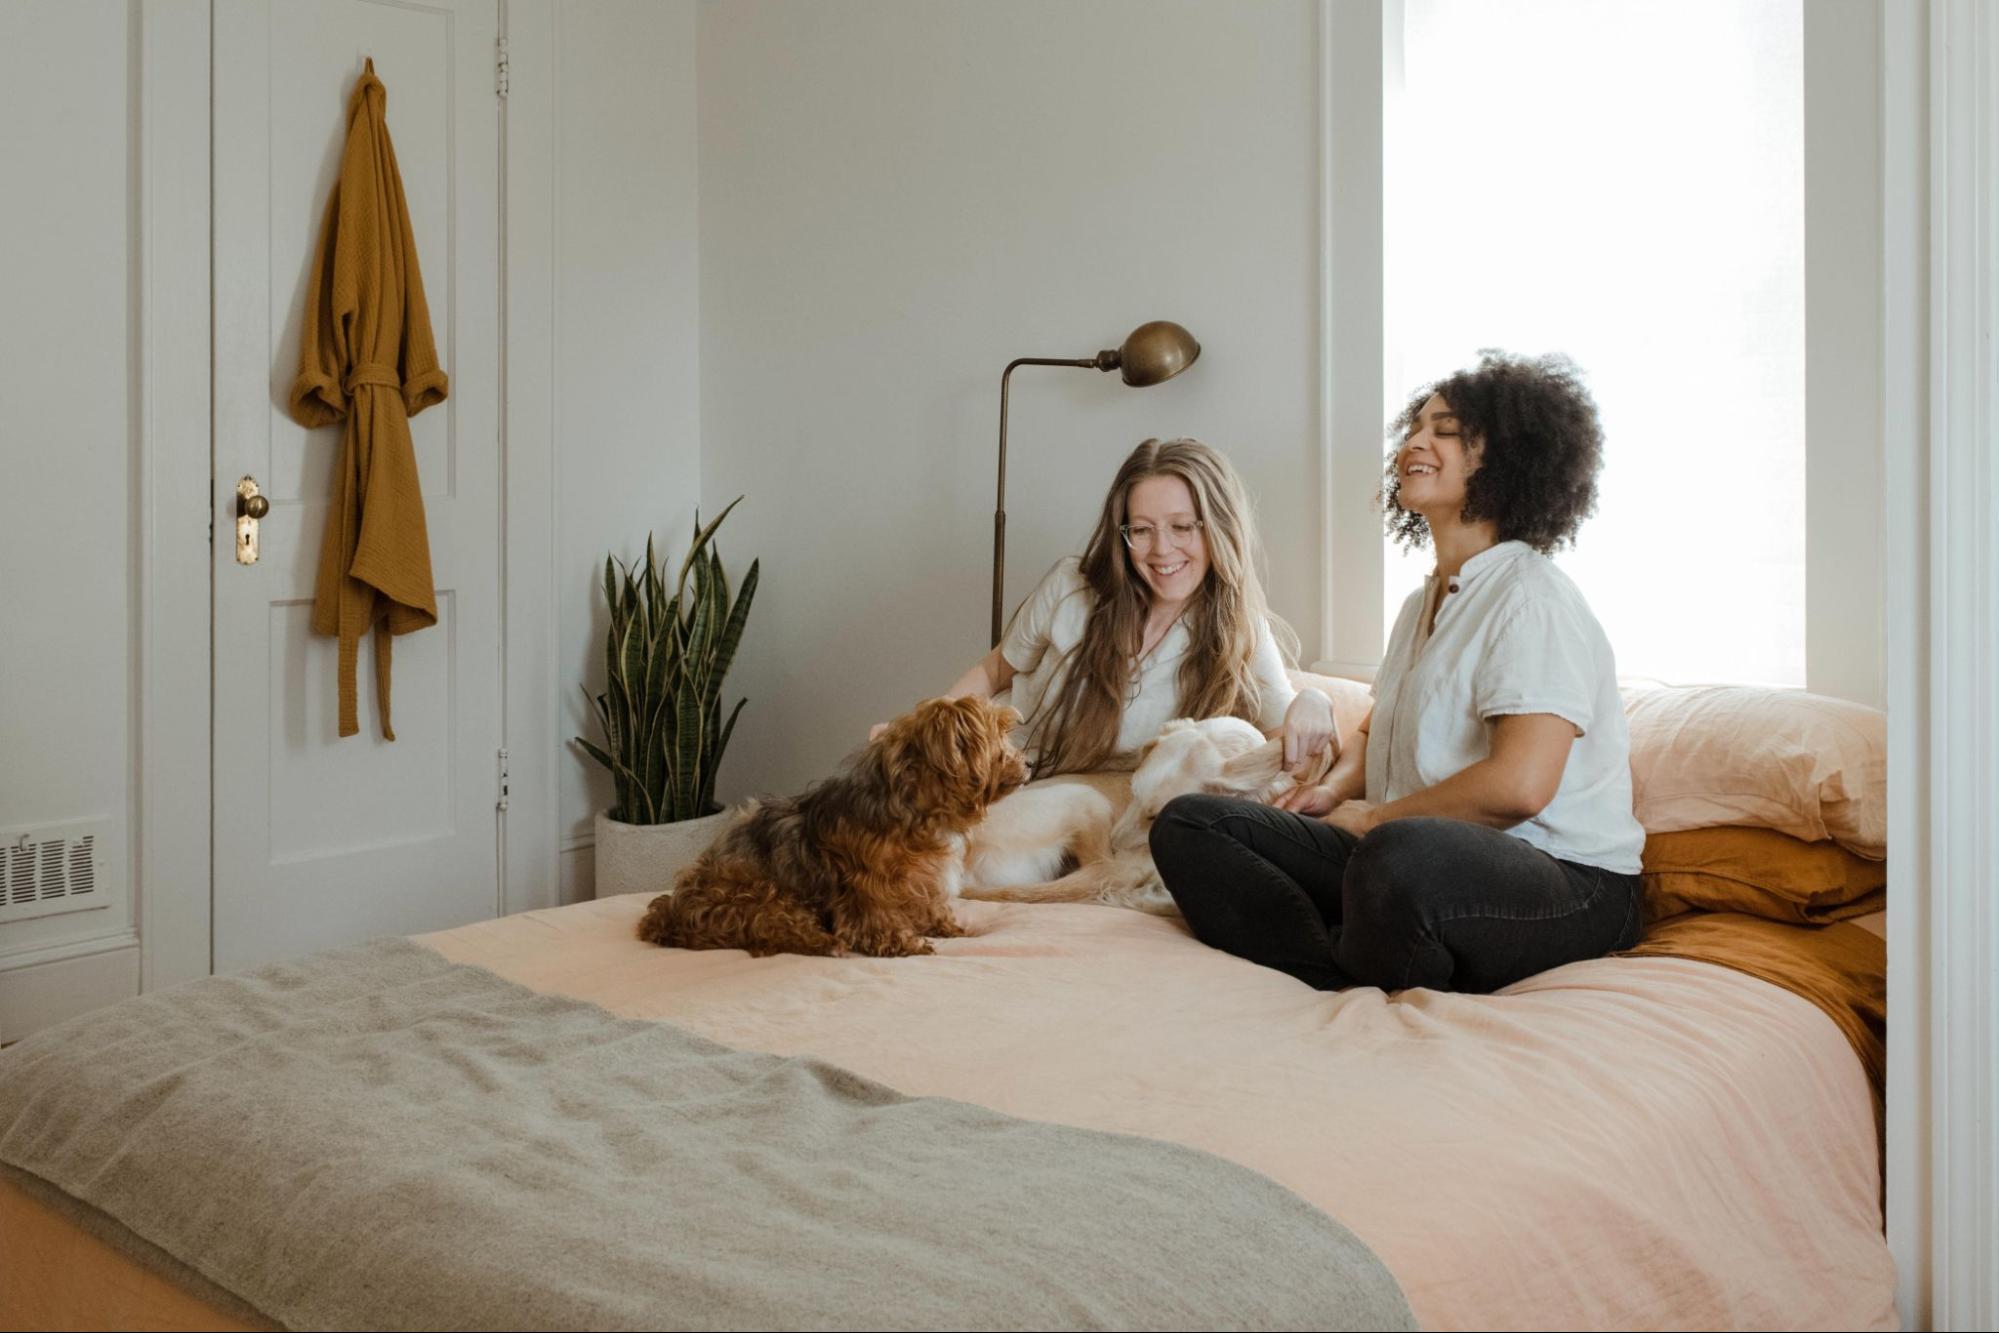 Two female-presenting people sitting on a bed with their dogs. They are smiling.